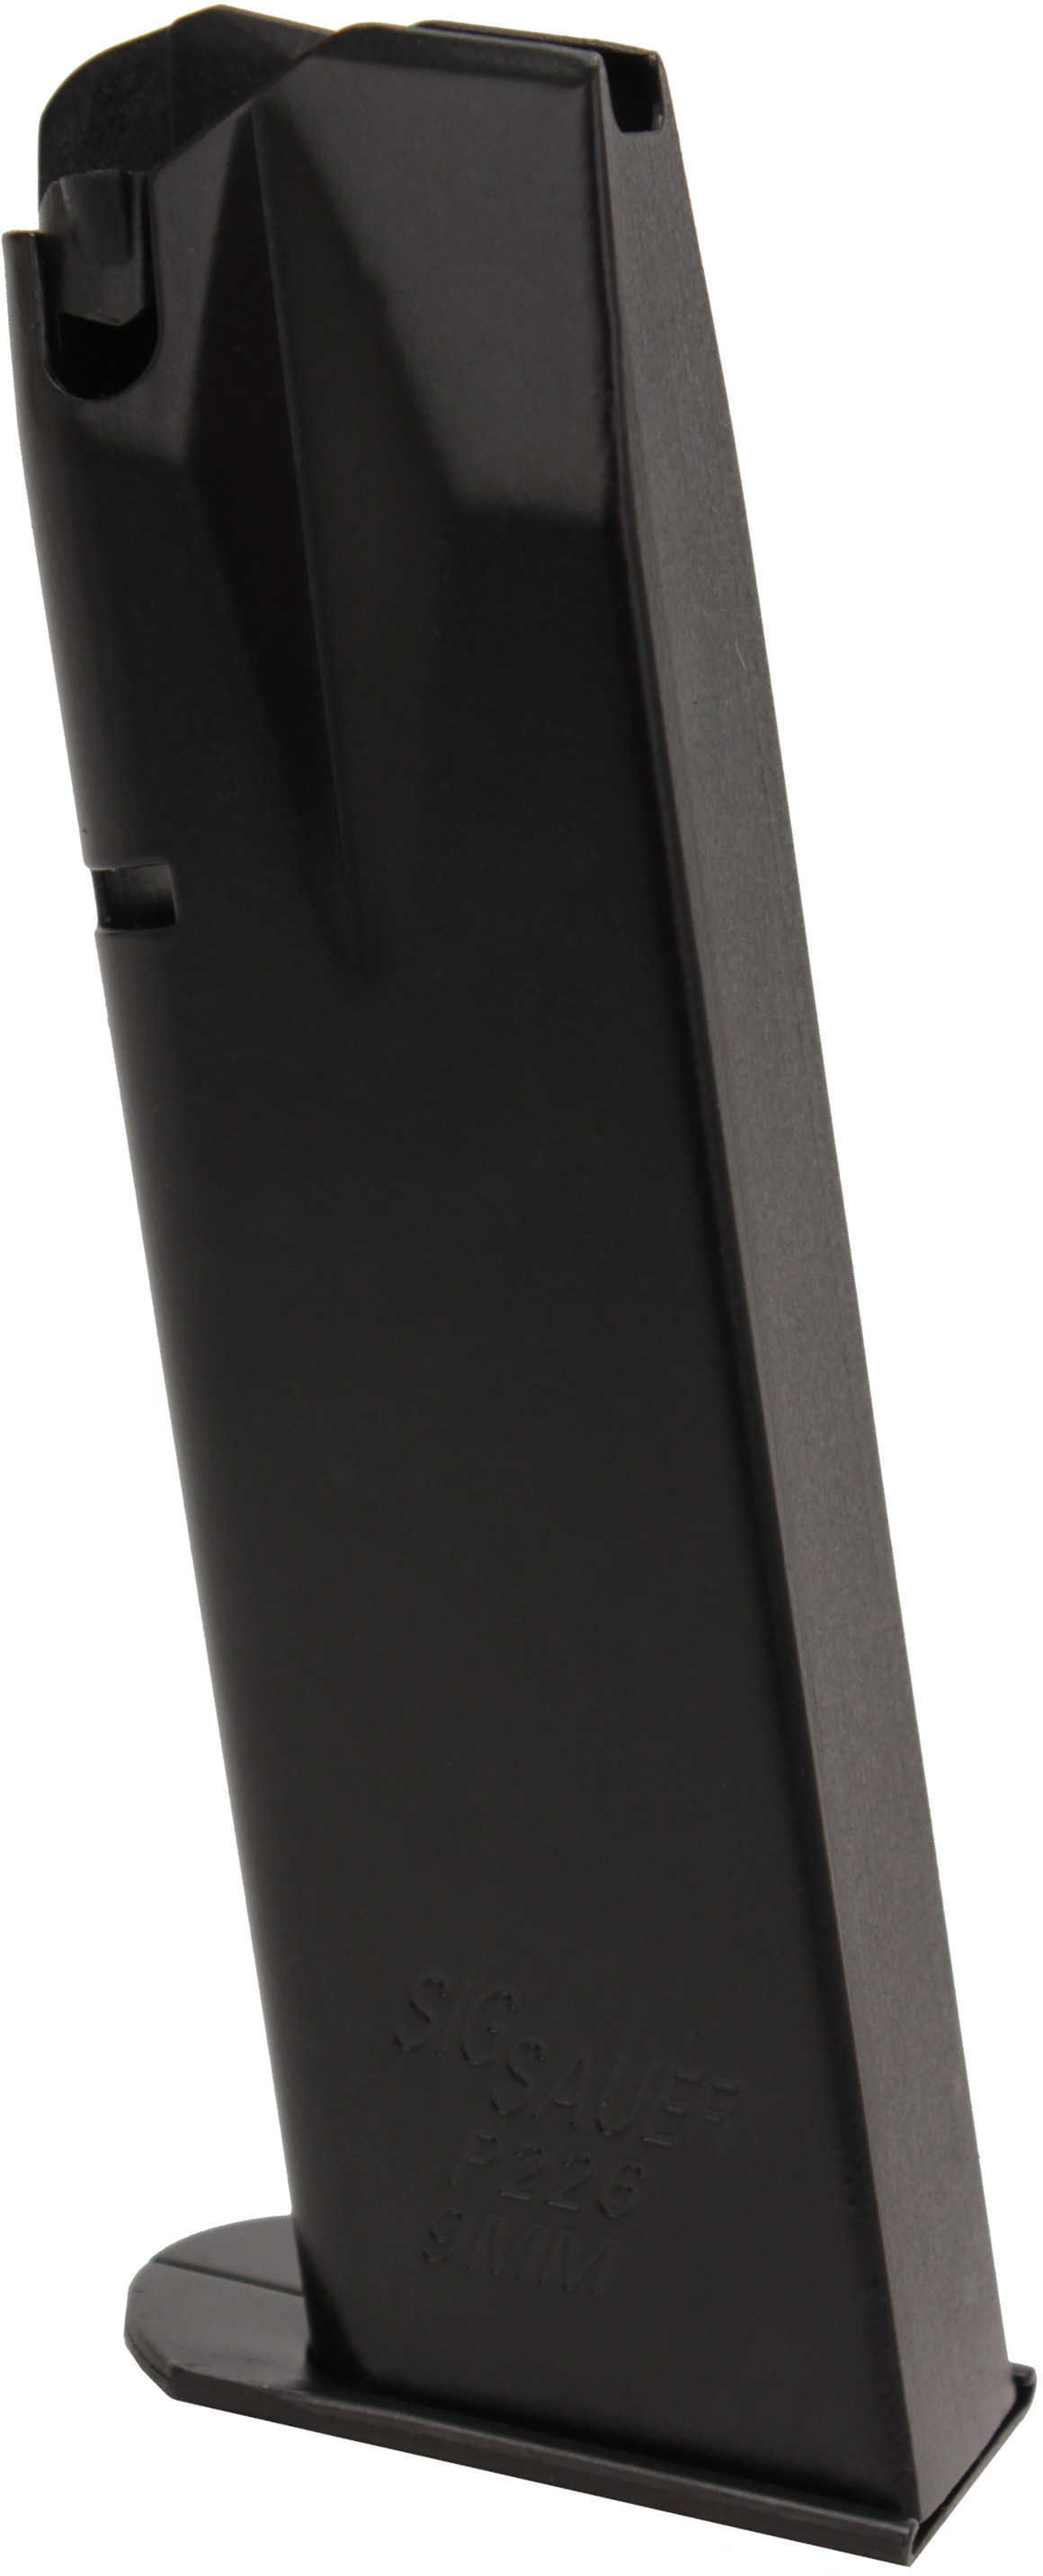 Sig Magazine P226 - 9mm - 15 Rounds Not Available For Shipment To All States